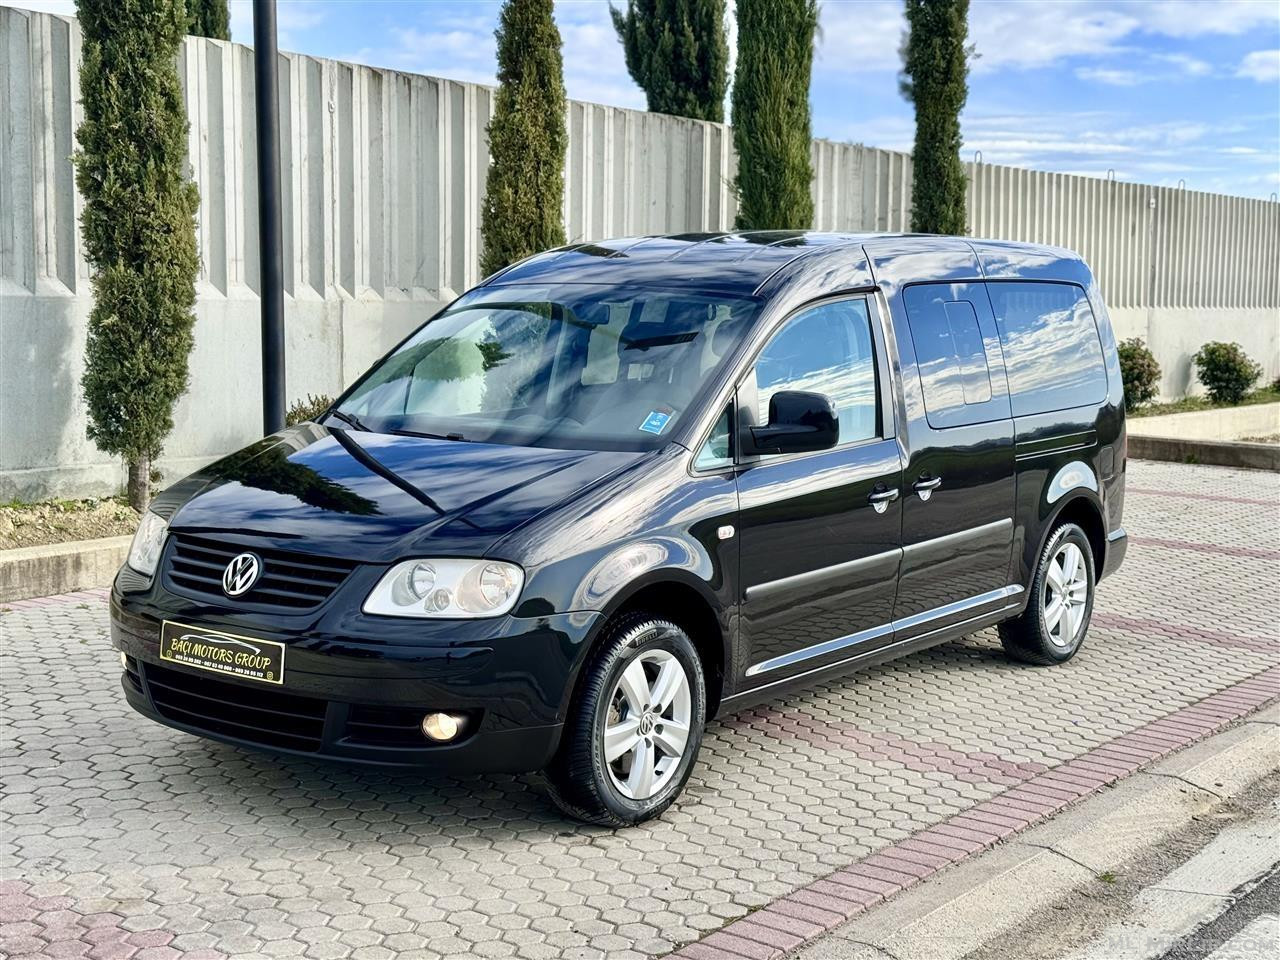 Volkswagen Caddy Maxi Life Manuale 6marshe 